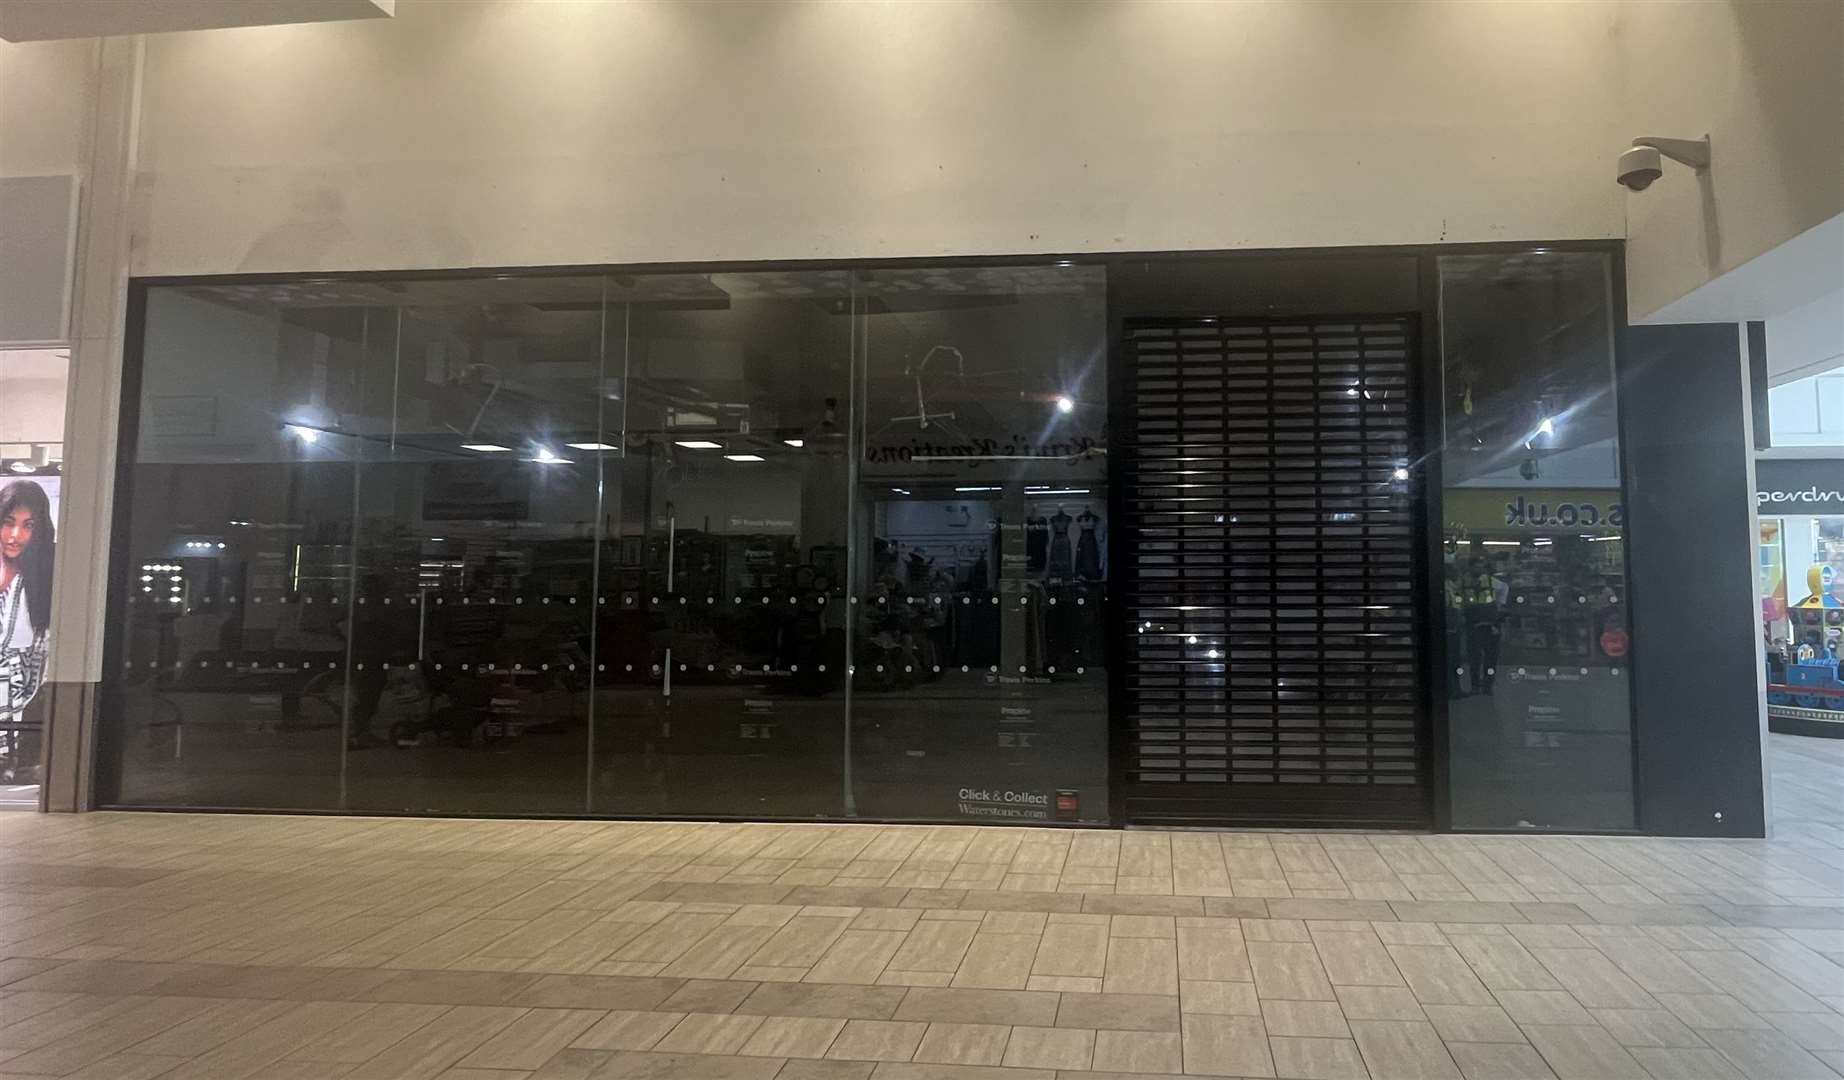 Contractors have started work inside the former Waterstones in Ashford